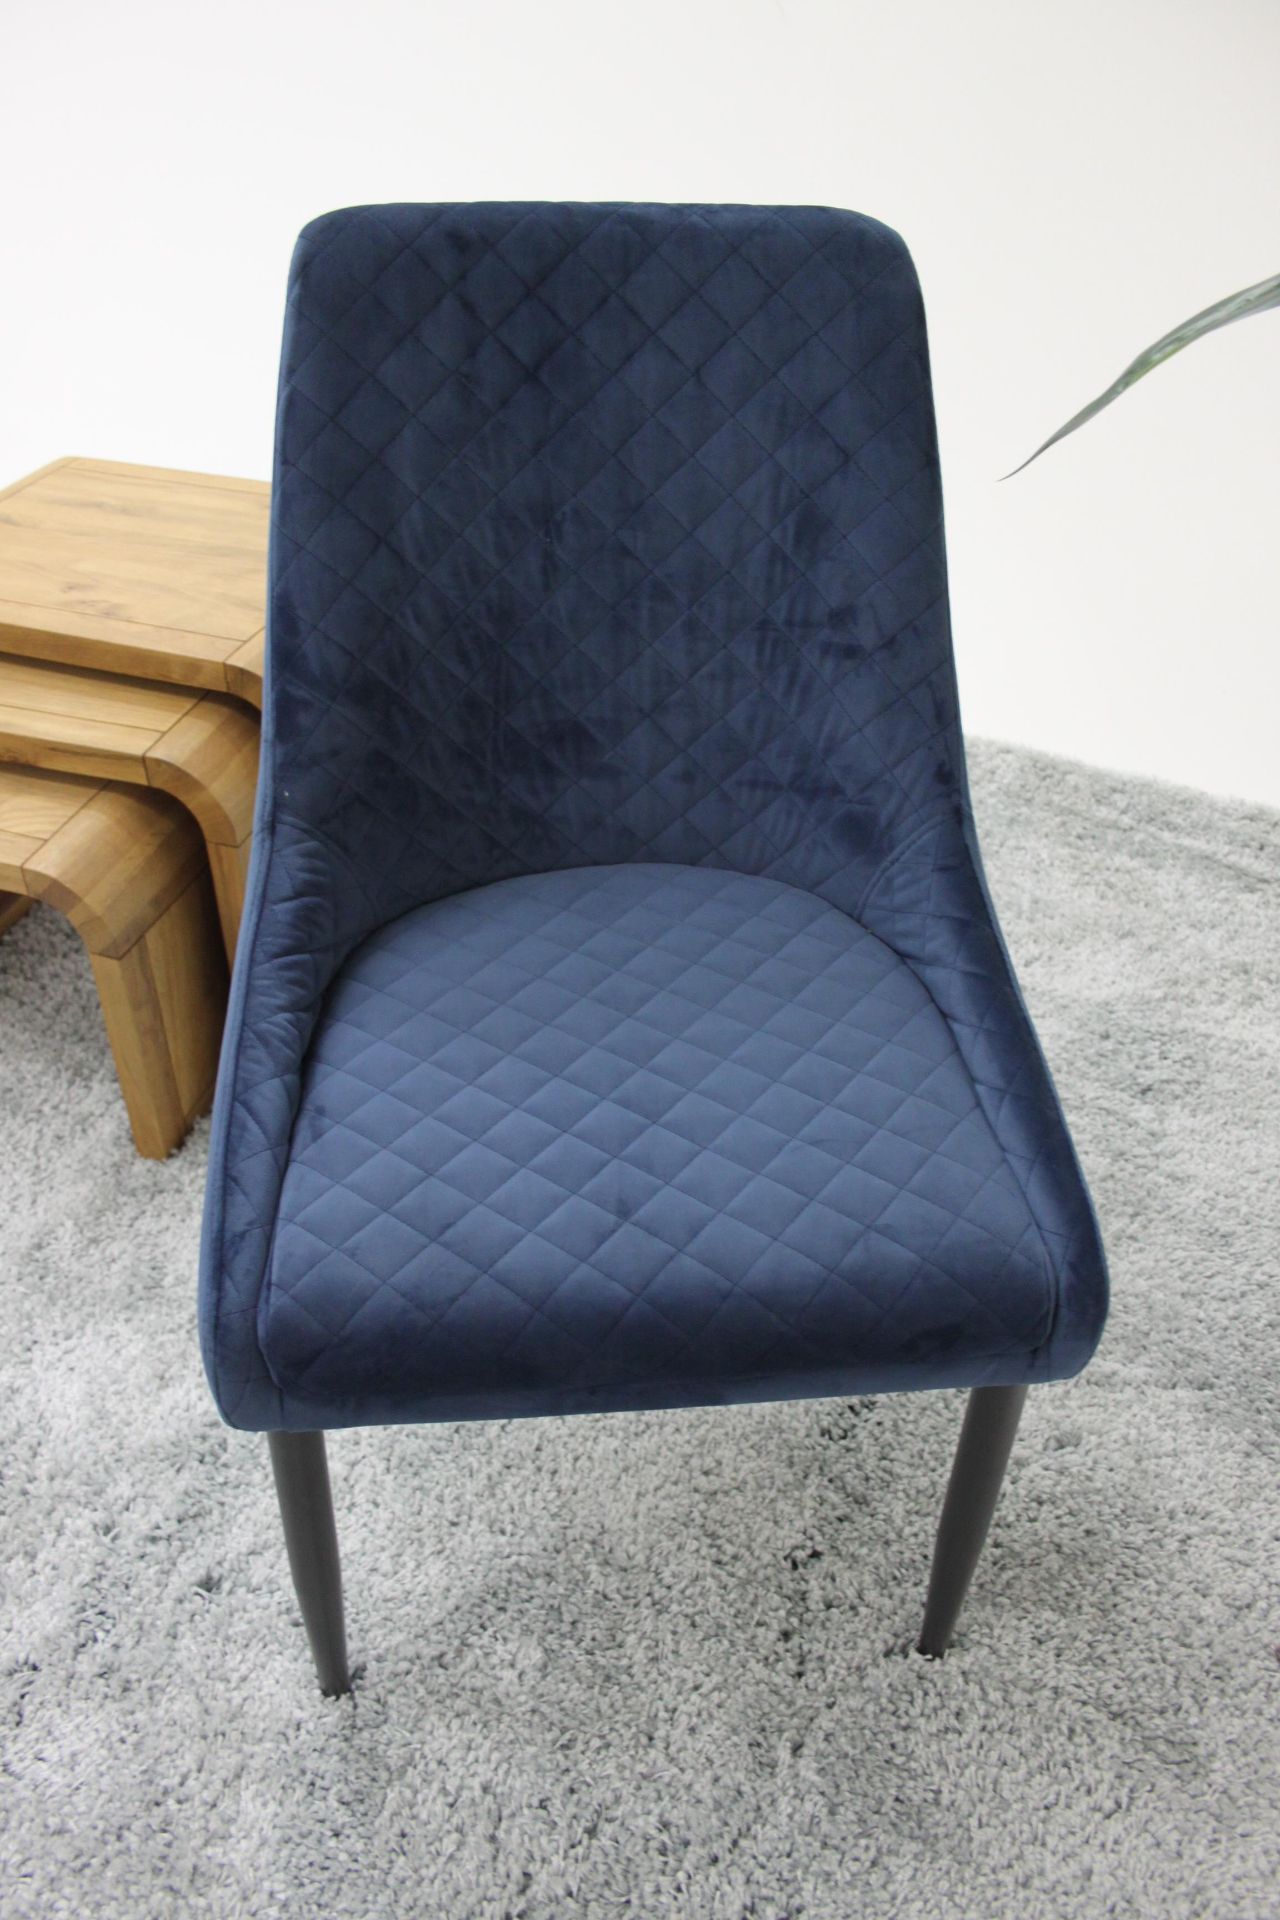 Aston Dining Chair Blue Velvet Quilted Dining Chair Is A Perfect Combination Of Functionality - Image 3 of 3